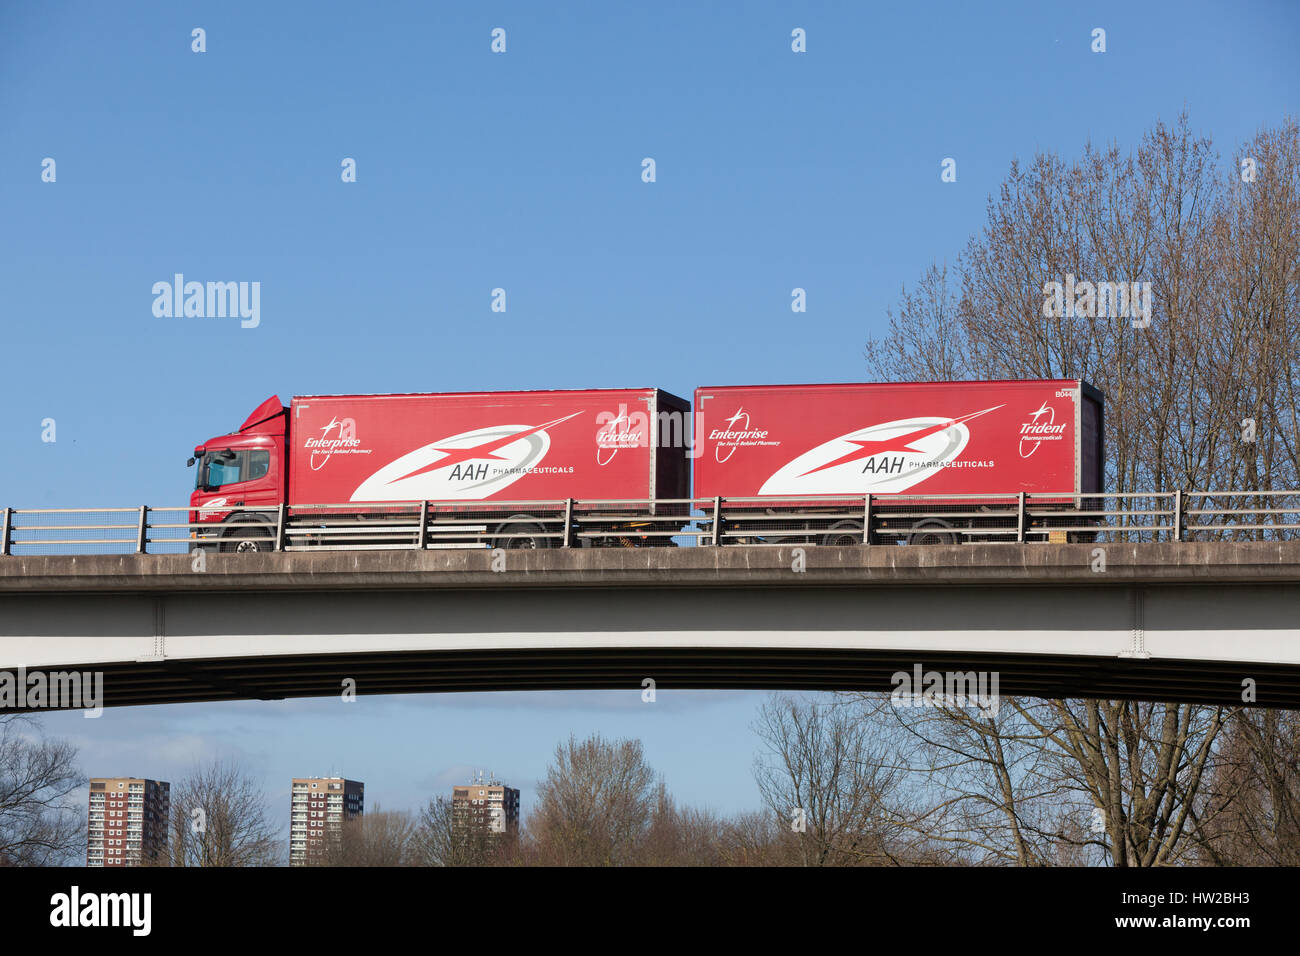 AAH Pharmaceuticals truck on the road in the Midlands Stock Photo